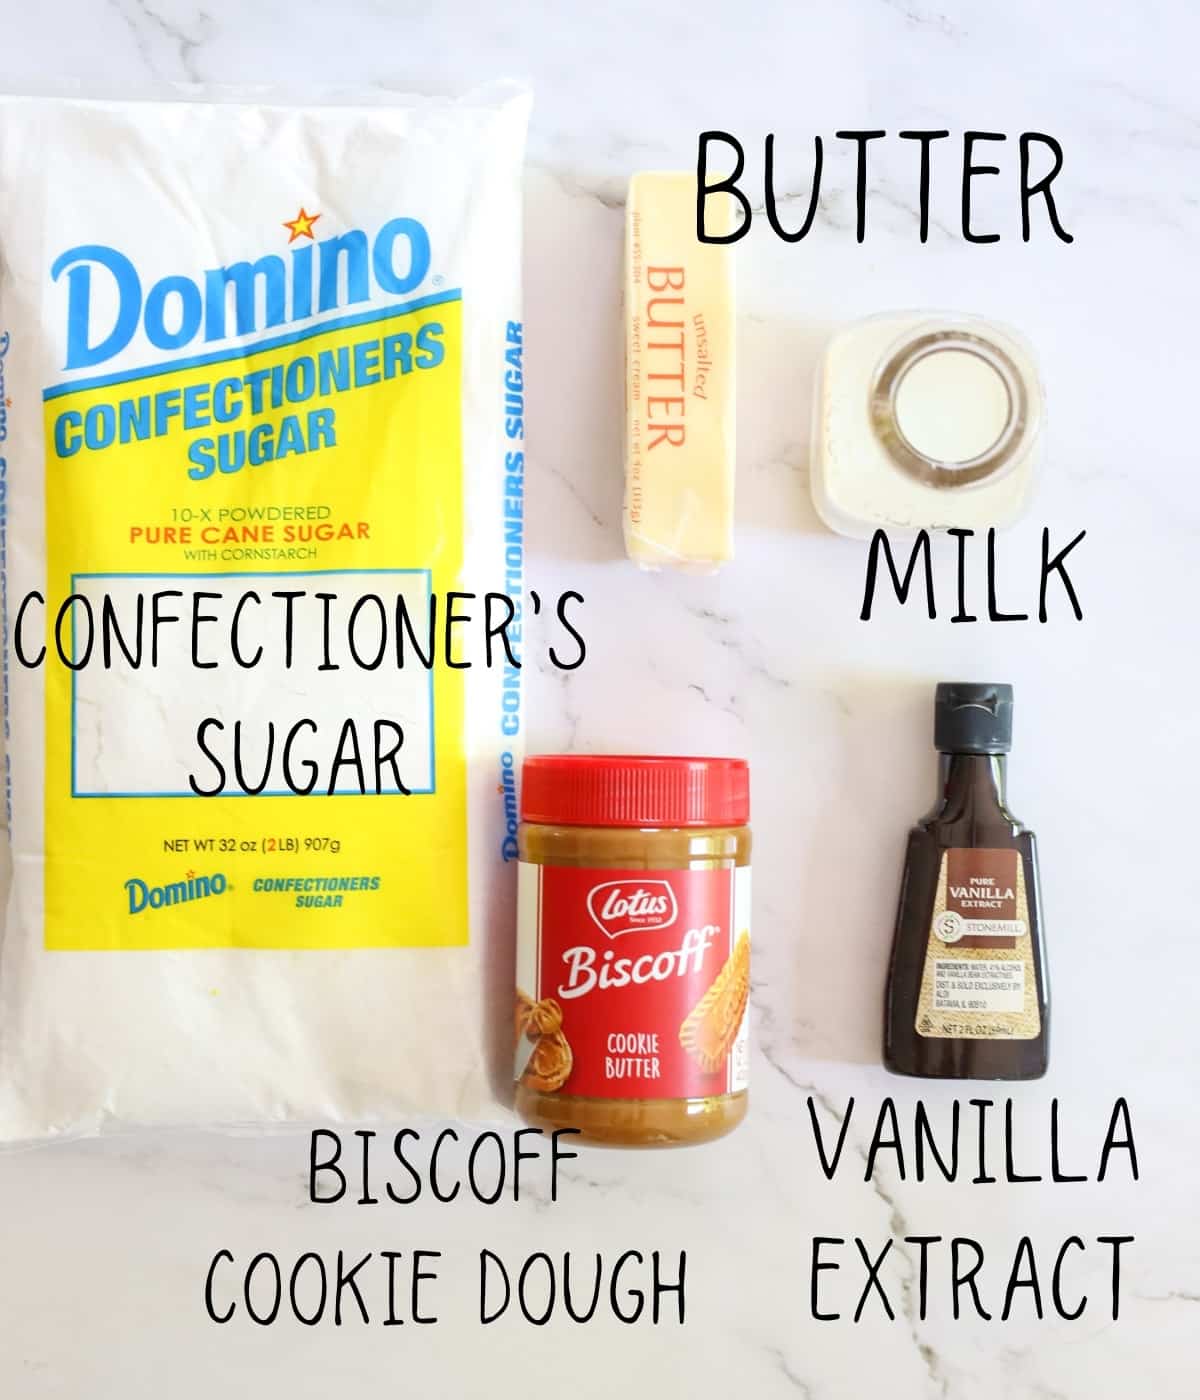 ingredients for Biscoff cookie butter fudge, including vanilla extract, powdered sugar, butter, and milk